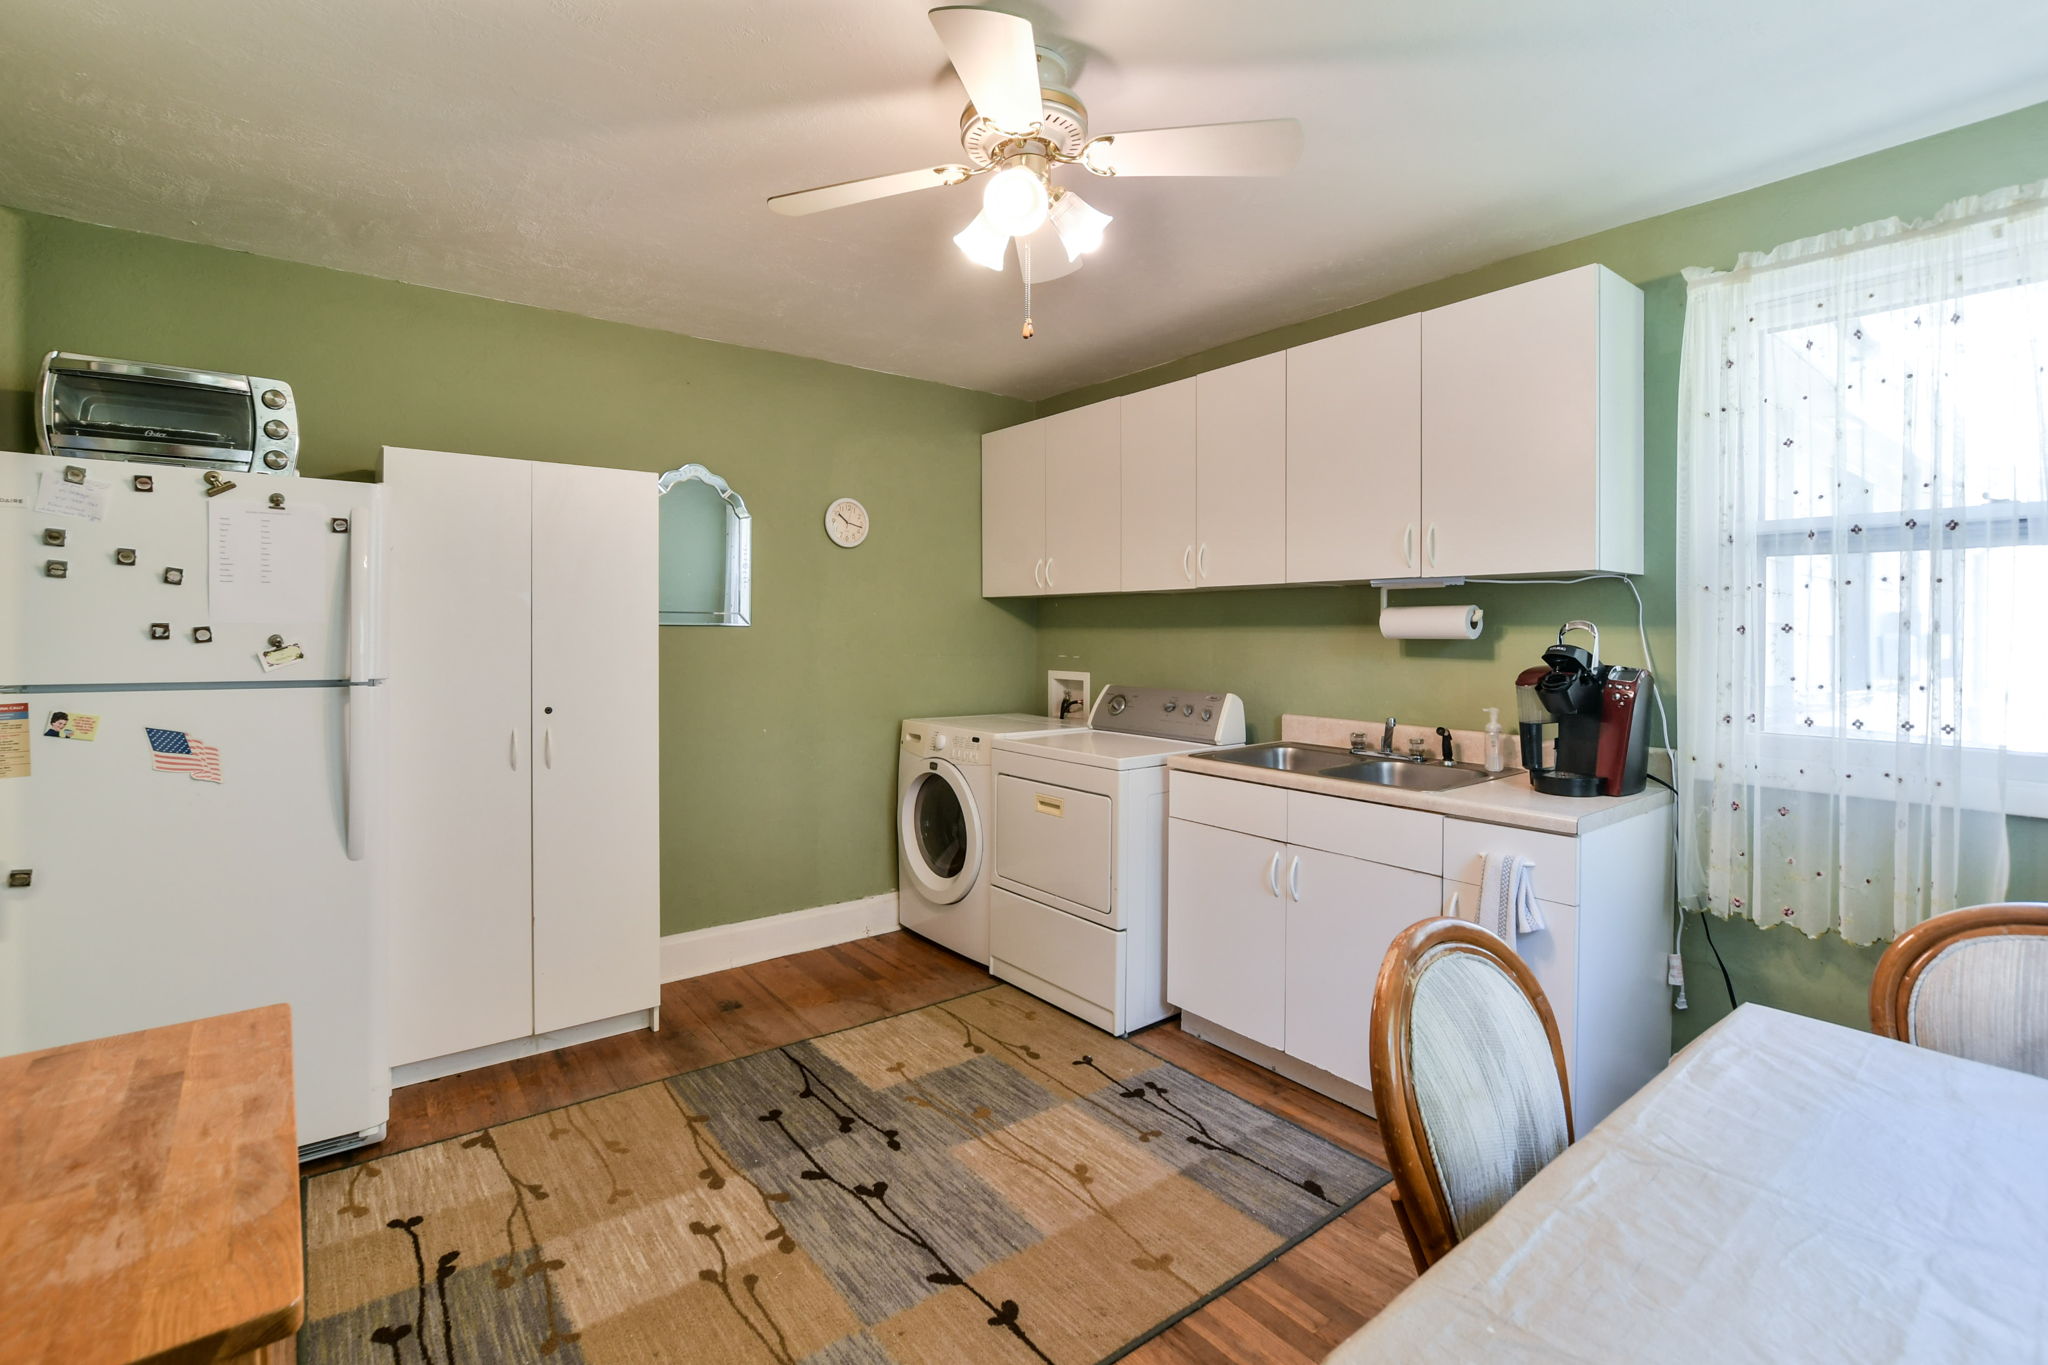 break room/laundry or potential laundry/craft room